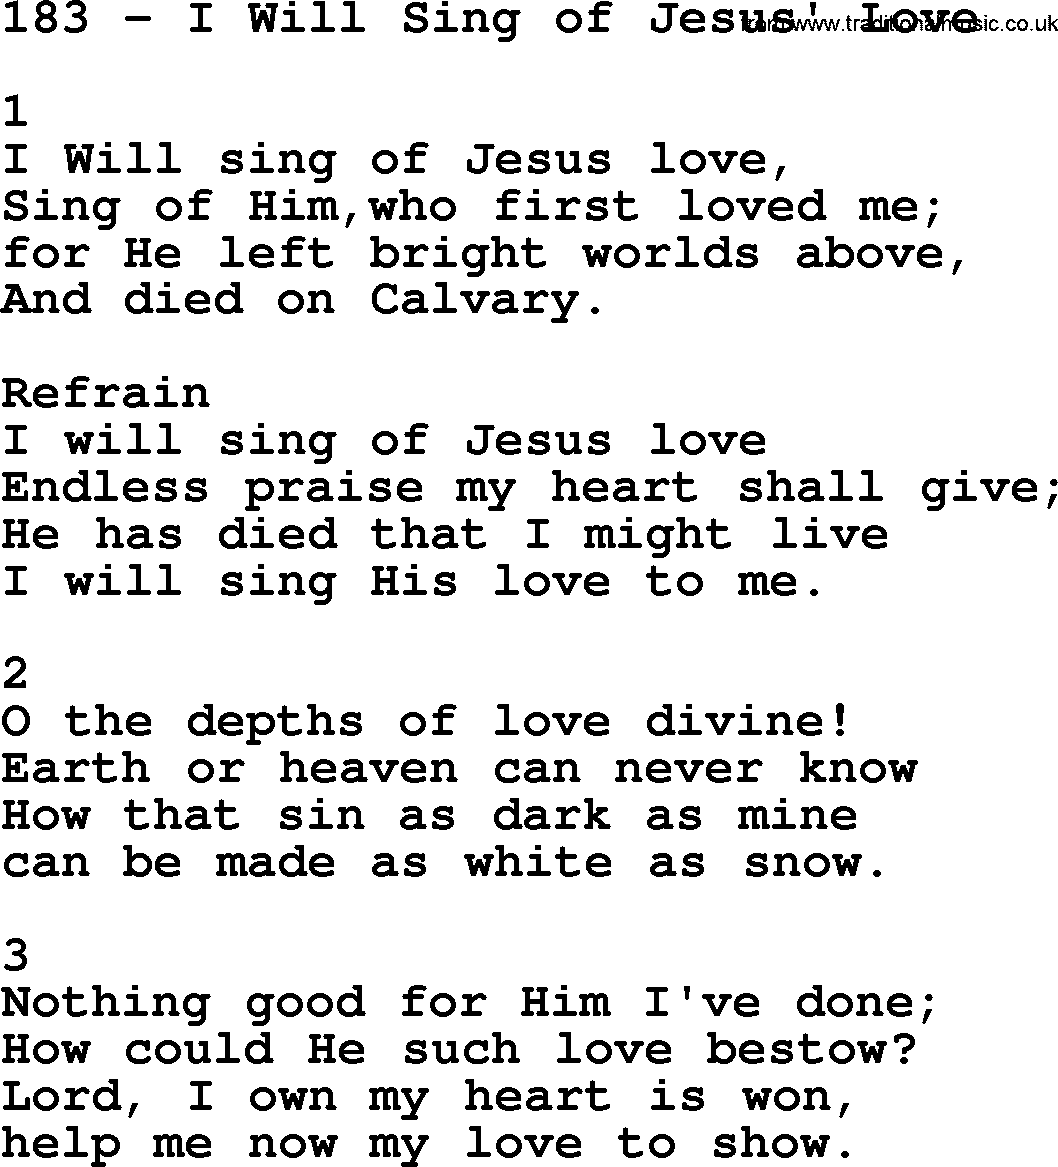 Complete Adventis Hymnal, title: 183-I Will Sing Of Jesus' Love, with lyrics, midi, mp3, powerpoints(PPT) and PDF,